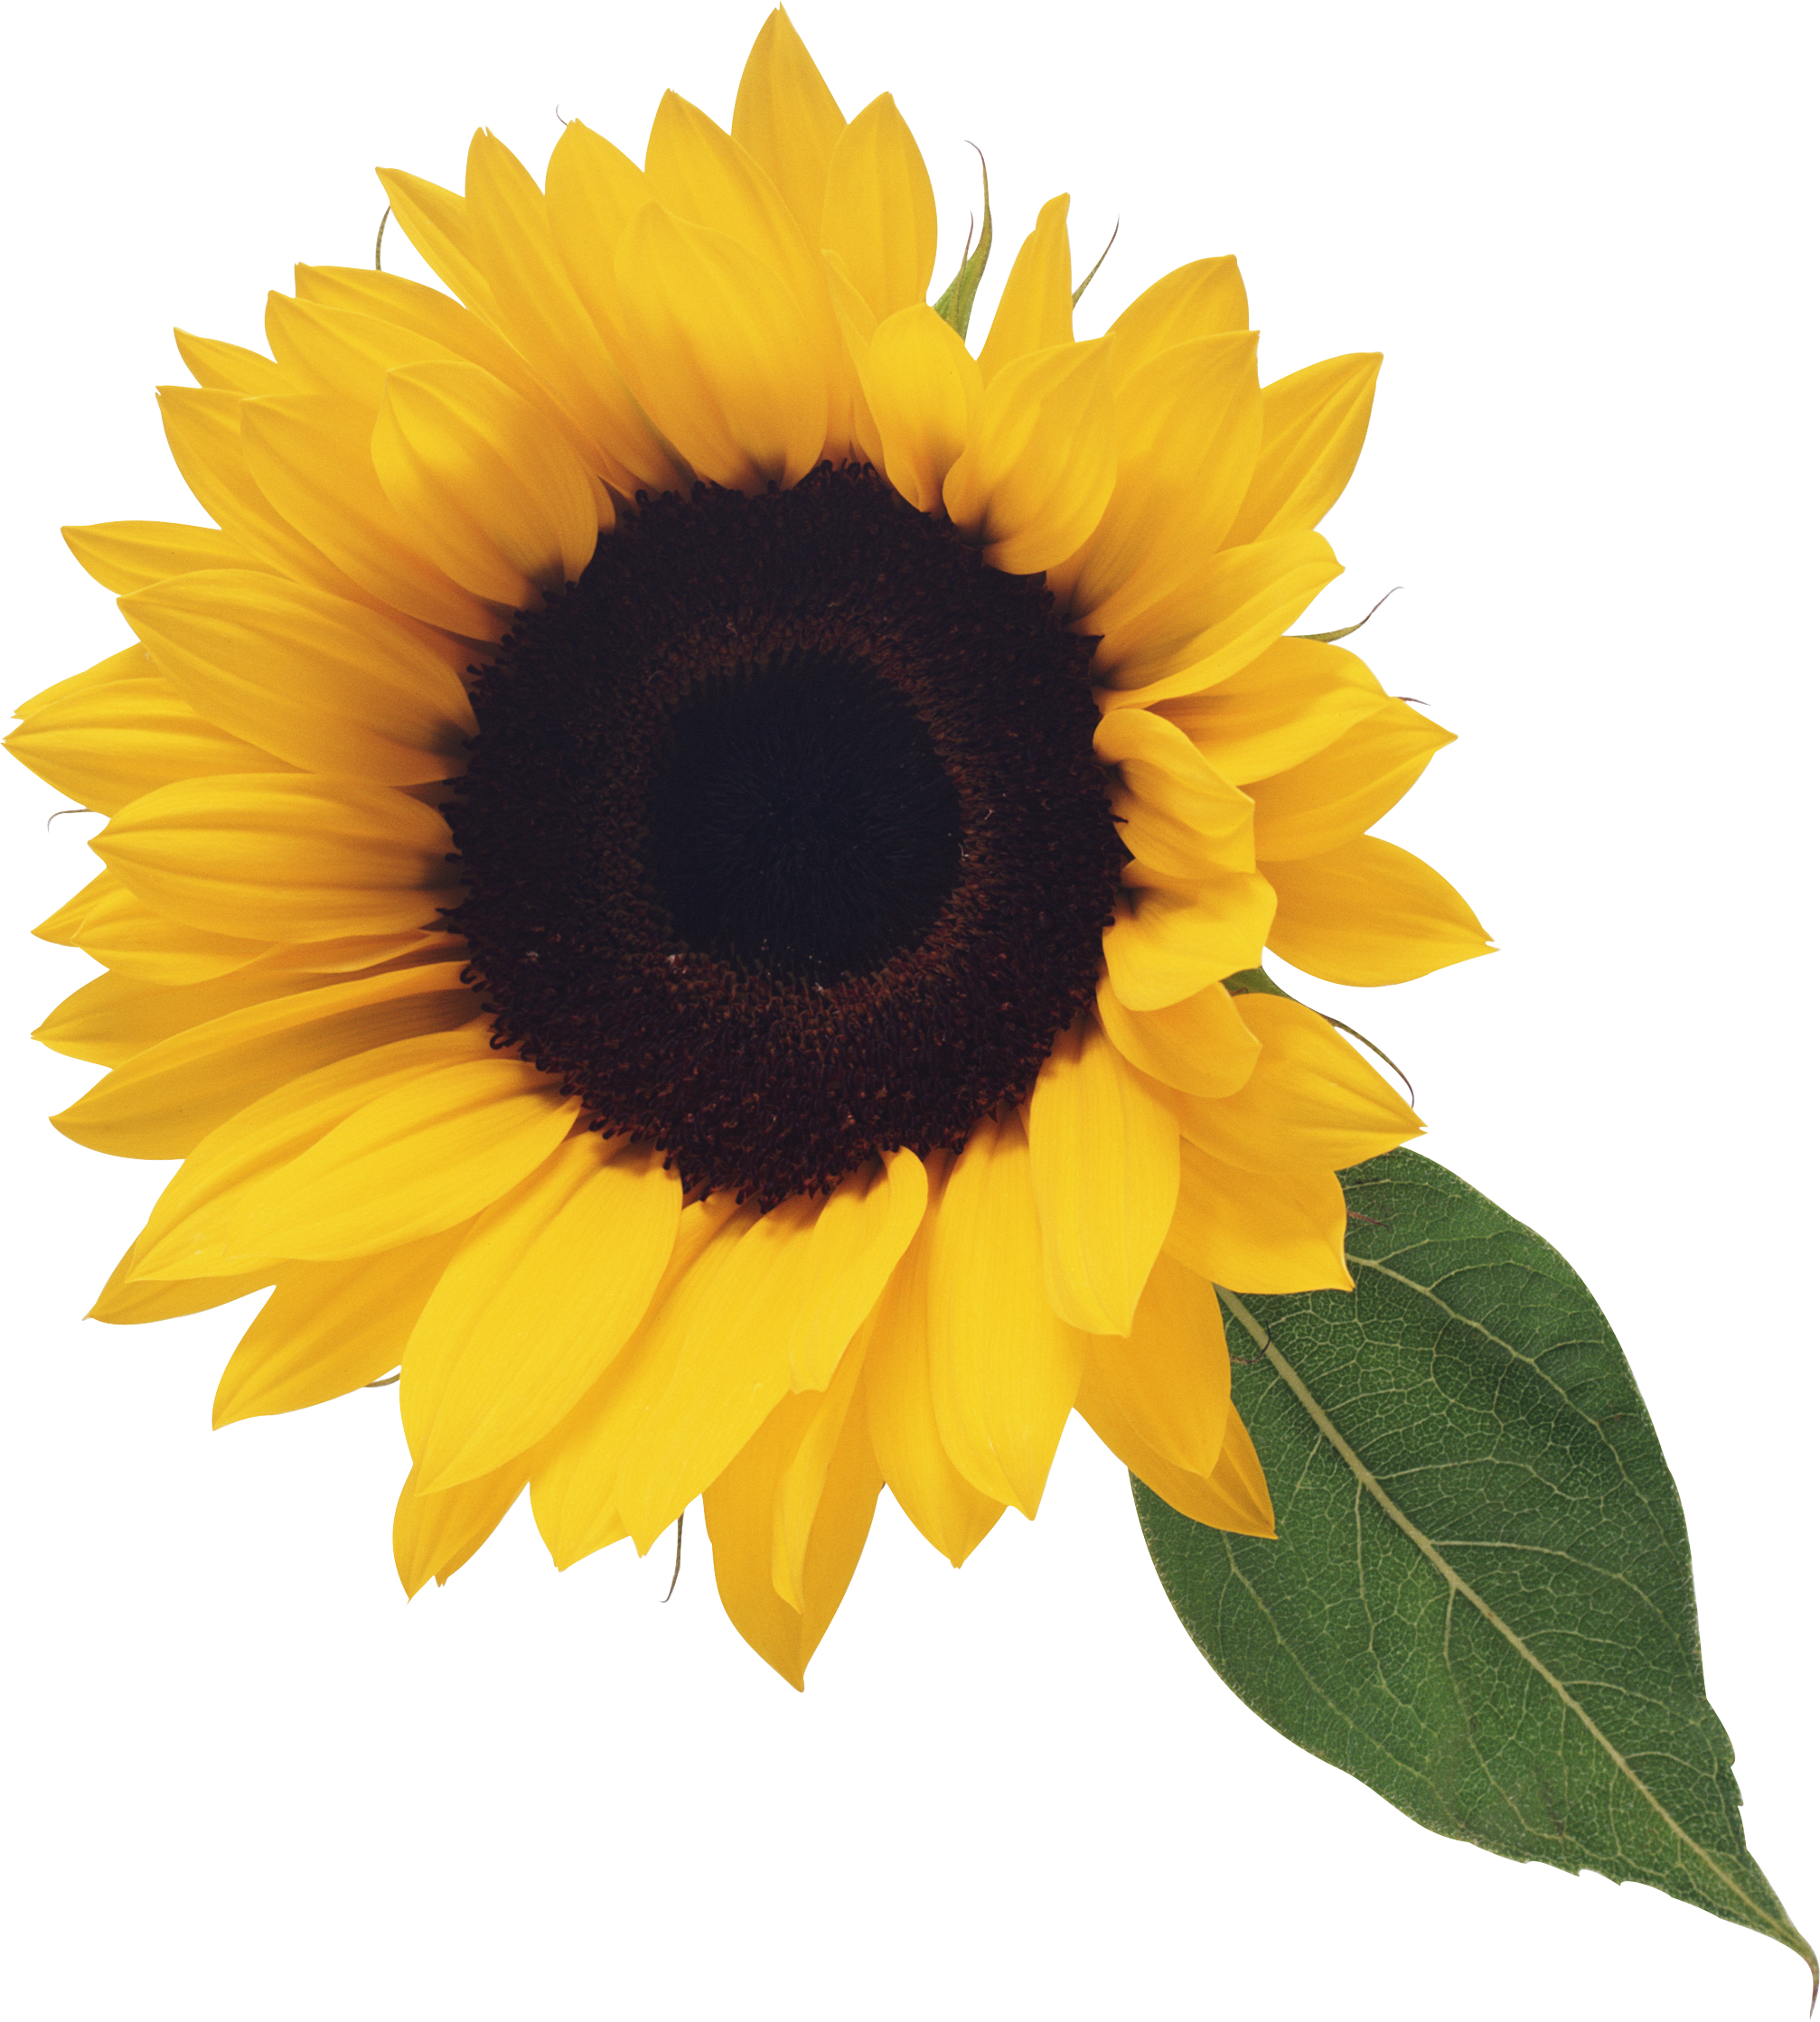 sunflower_PNG13389.png